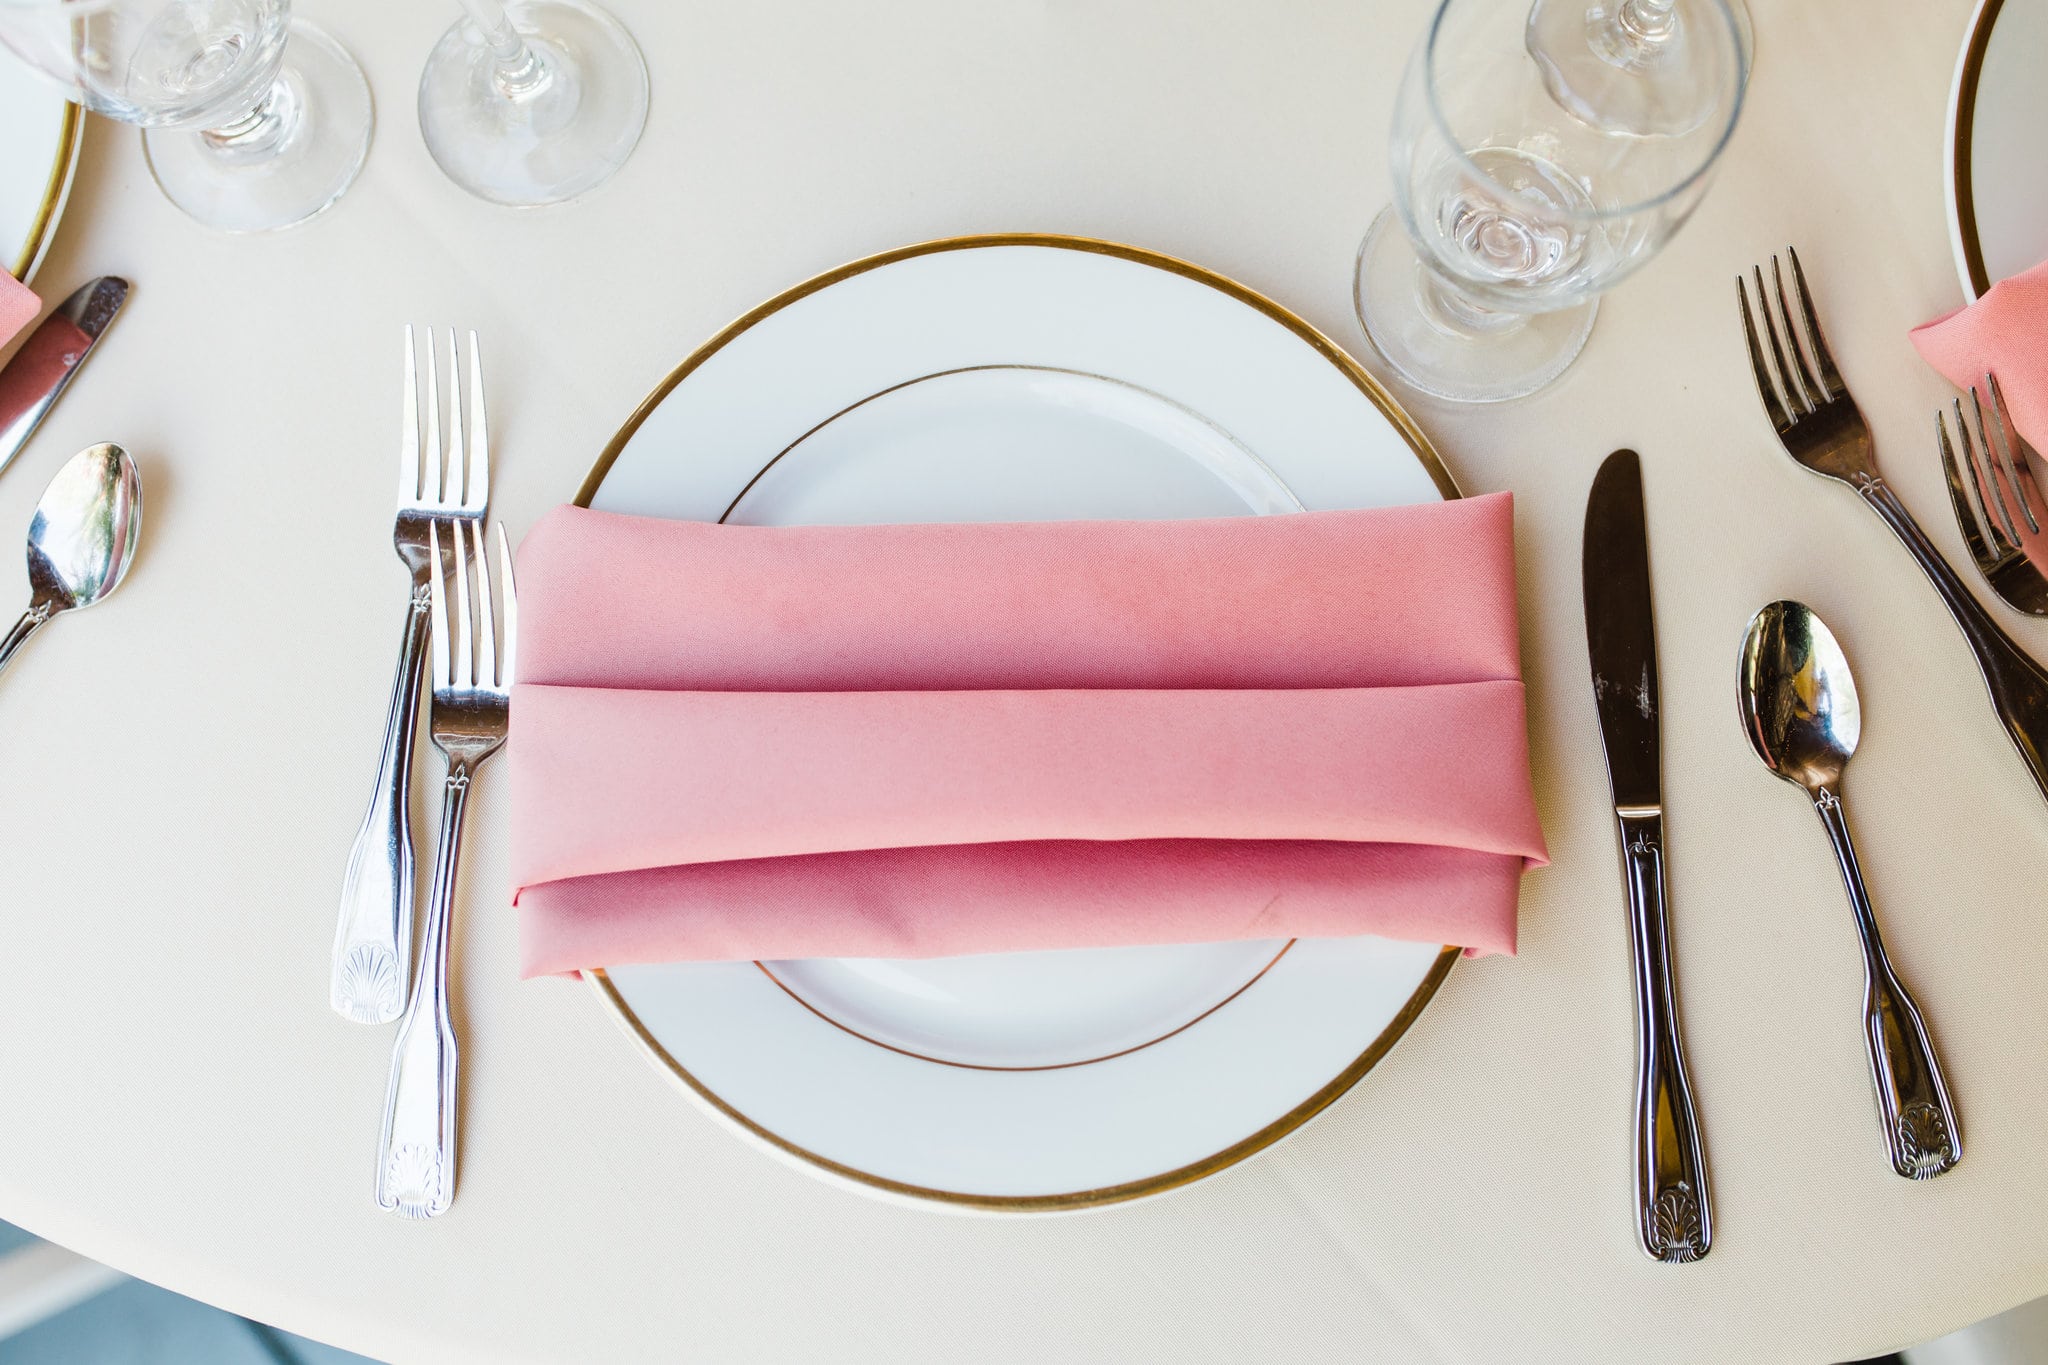 paradise cove reception details with hints of pink napkins